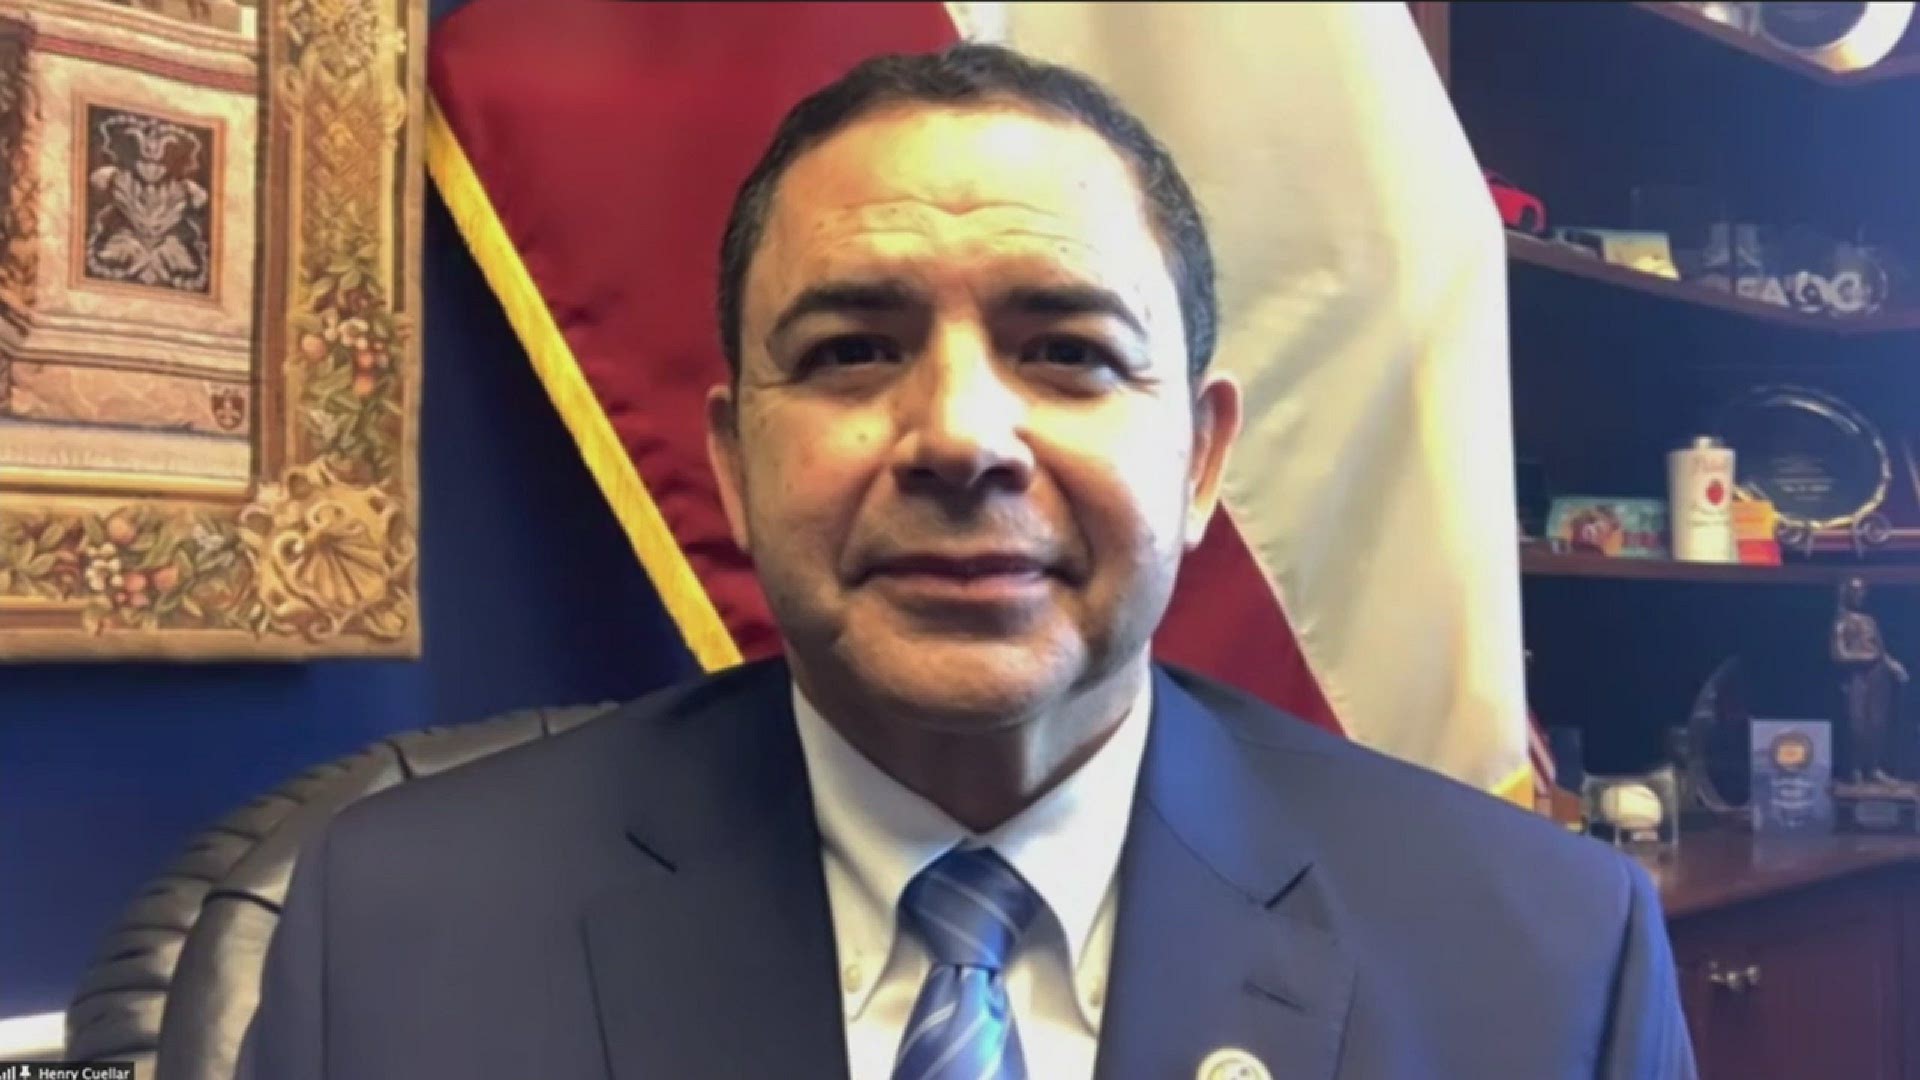 “All we want is to have border communities taken into consideration. They need to listen to the border mayors, they need to listen to the NGOs," said Rep. Cuellar.